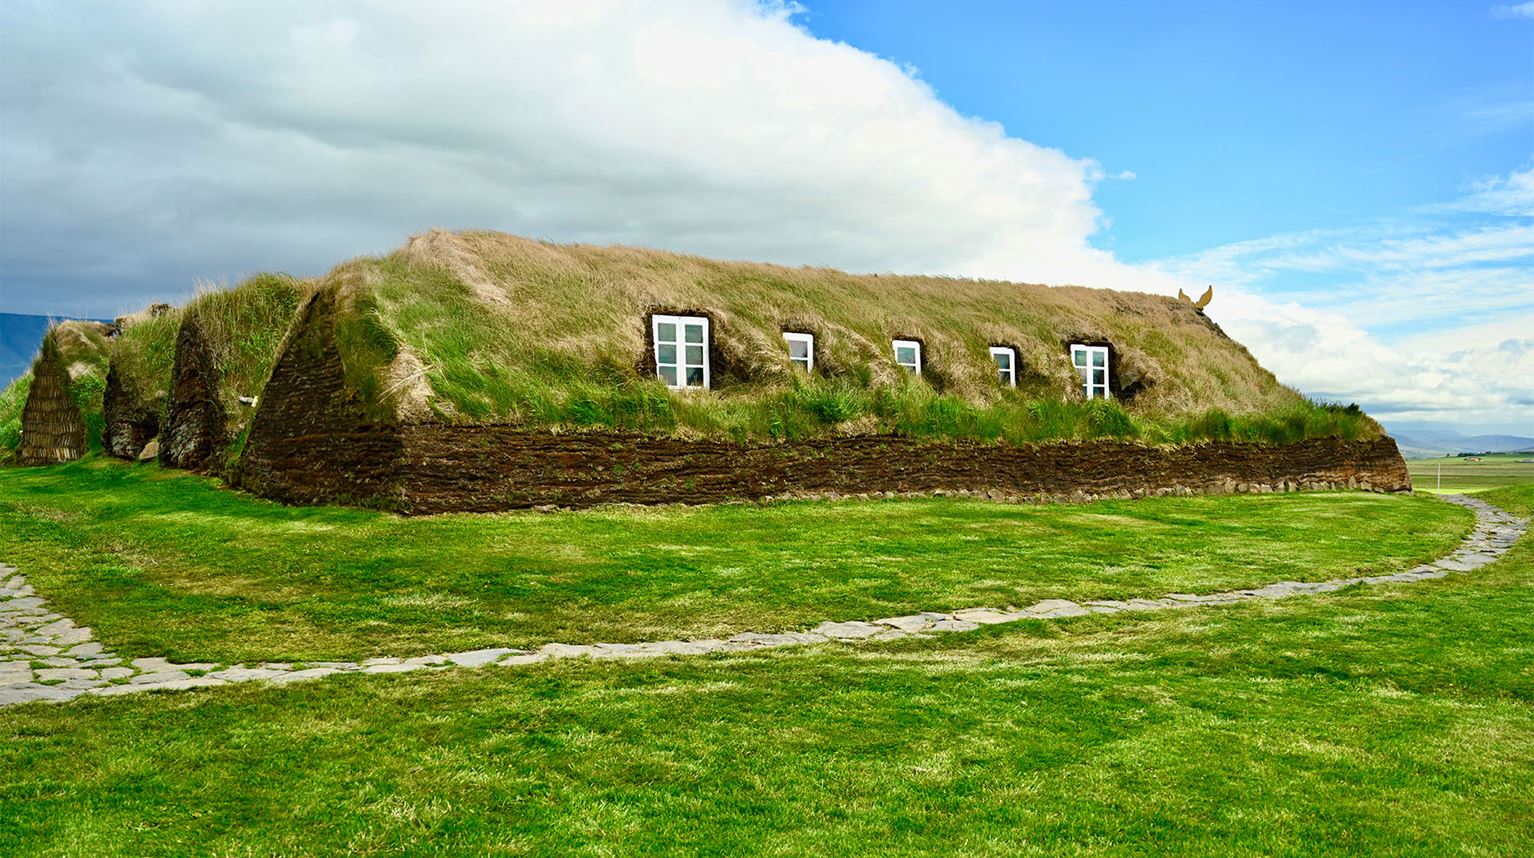 Exterior of a stone Viking Longhouse covered in grass.